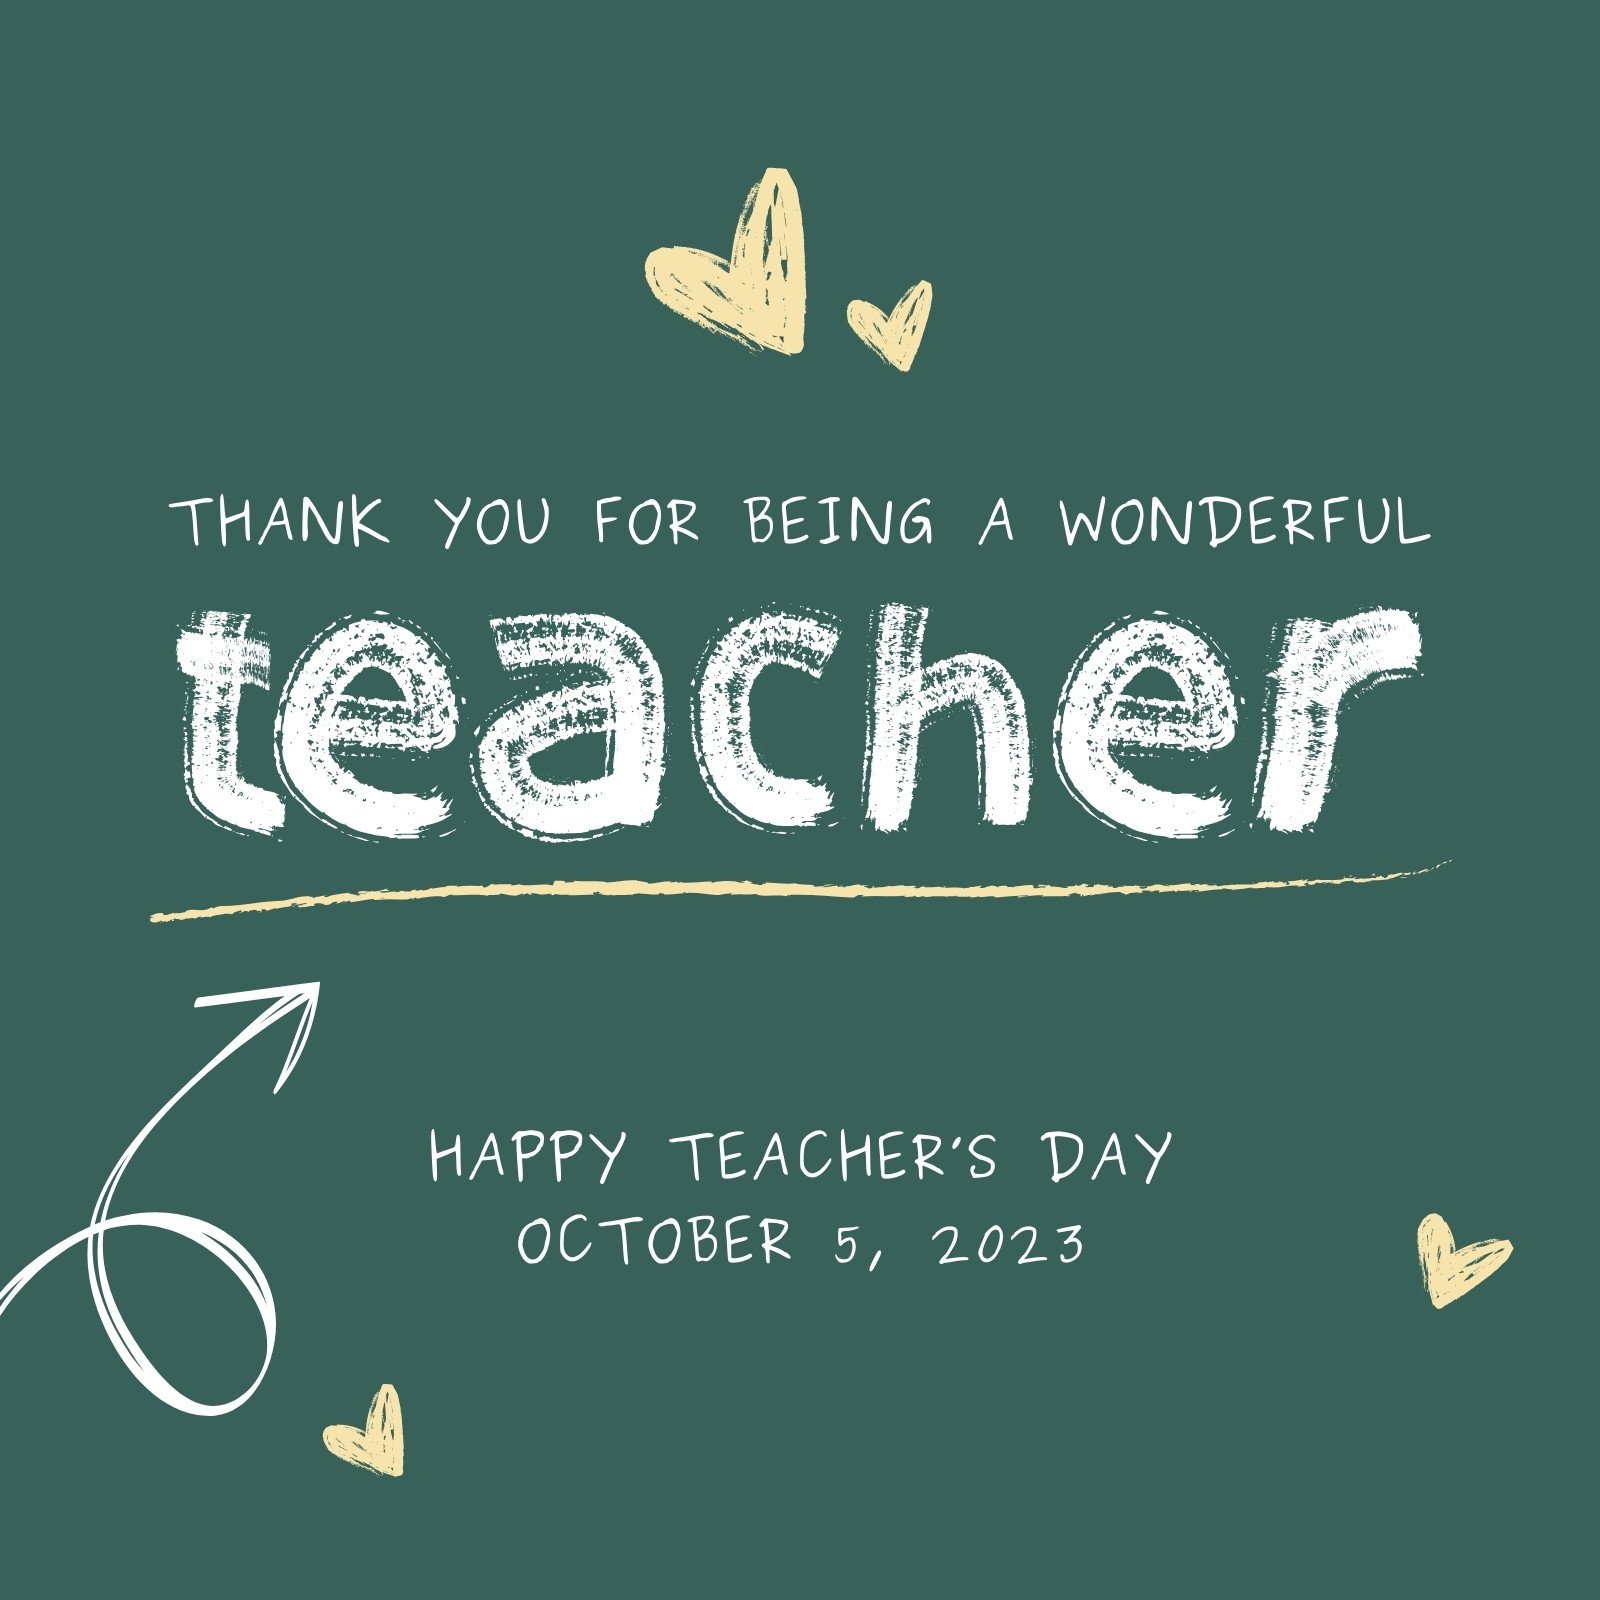 Personalized Table Top Photo Frame for Teachers Day - Incredible Gifts